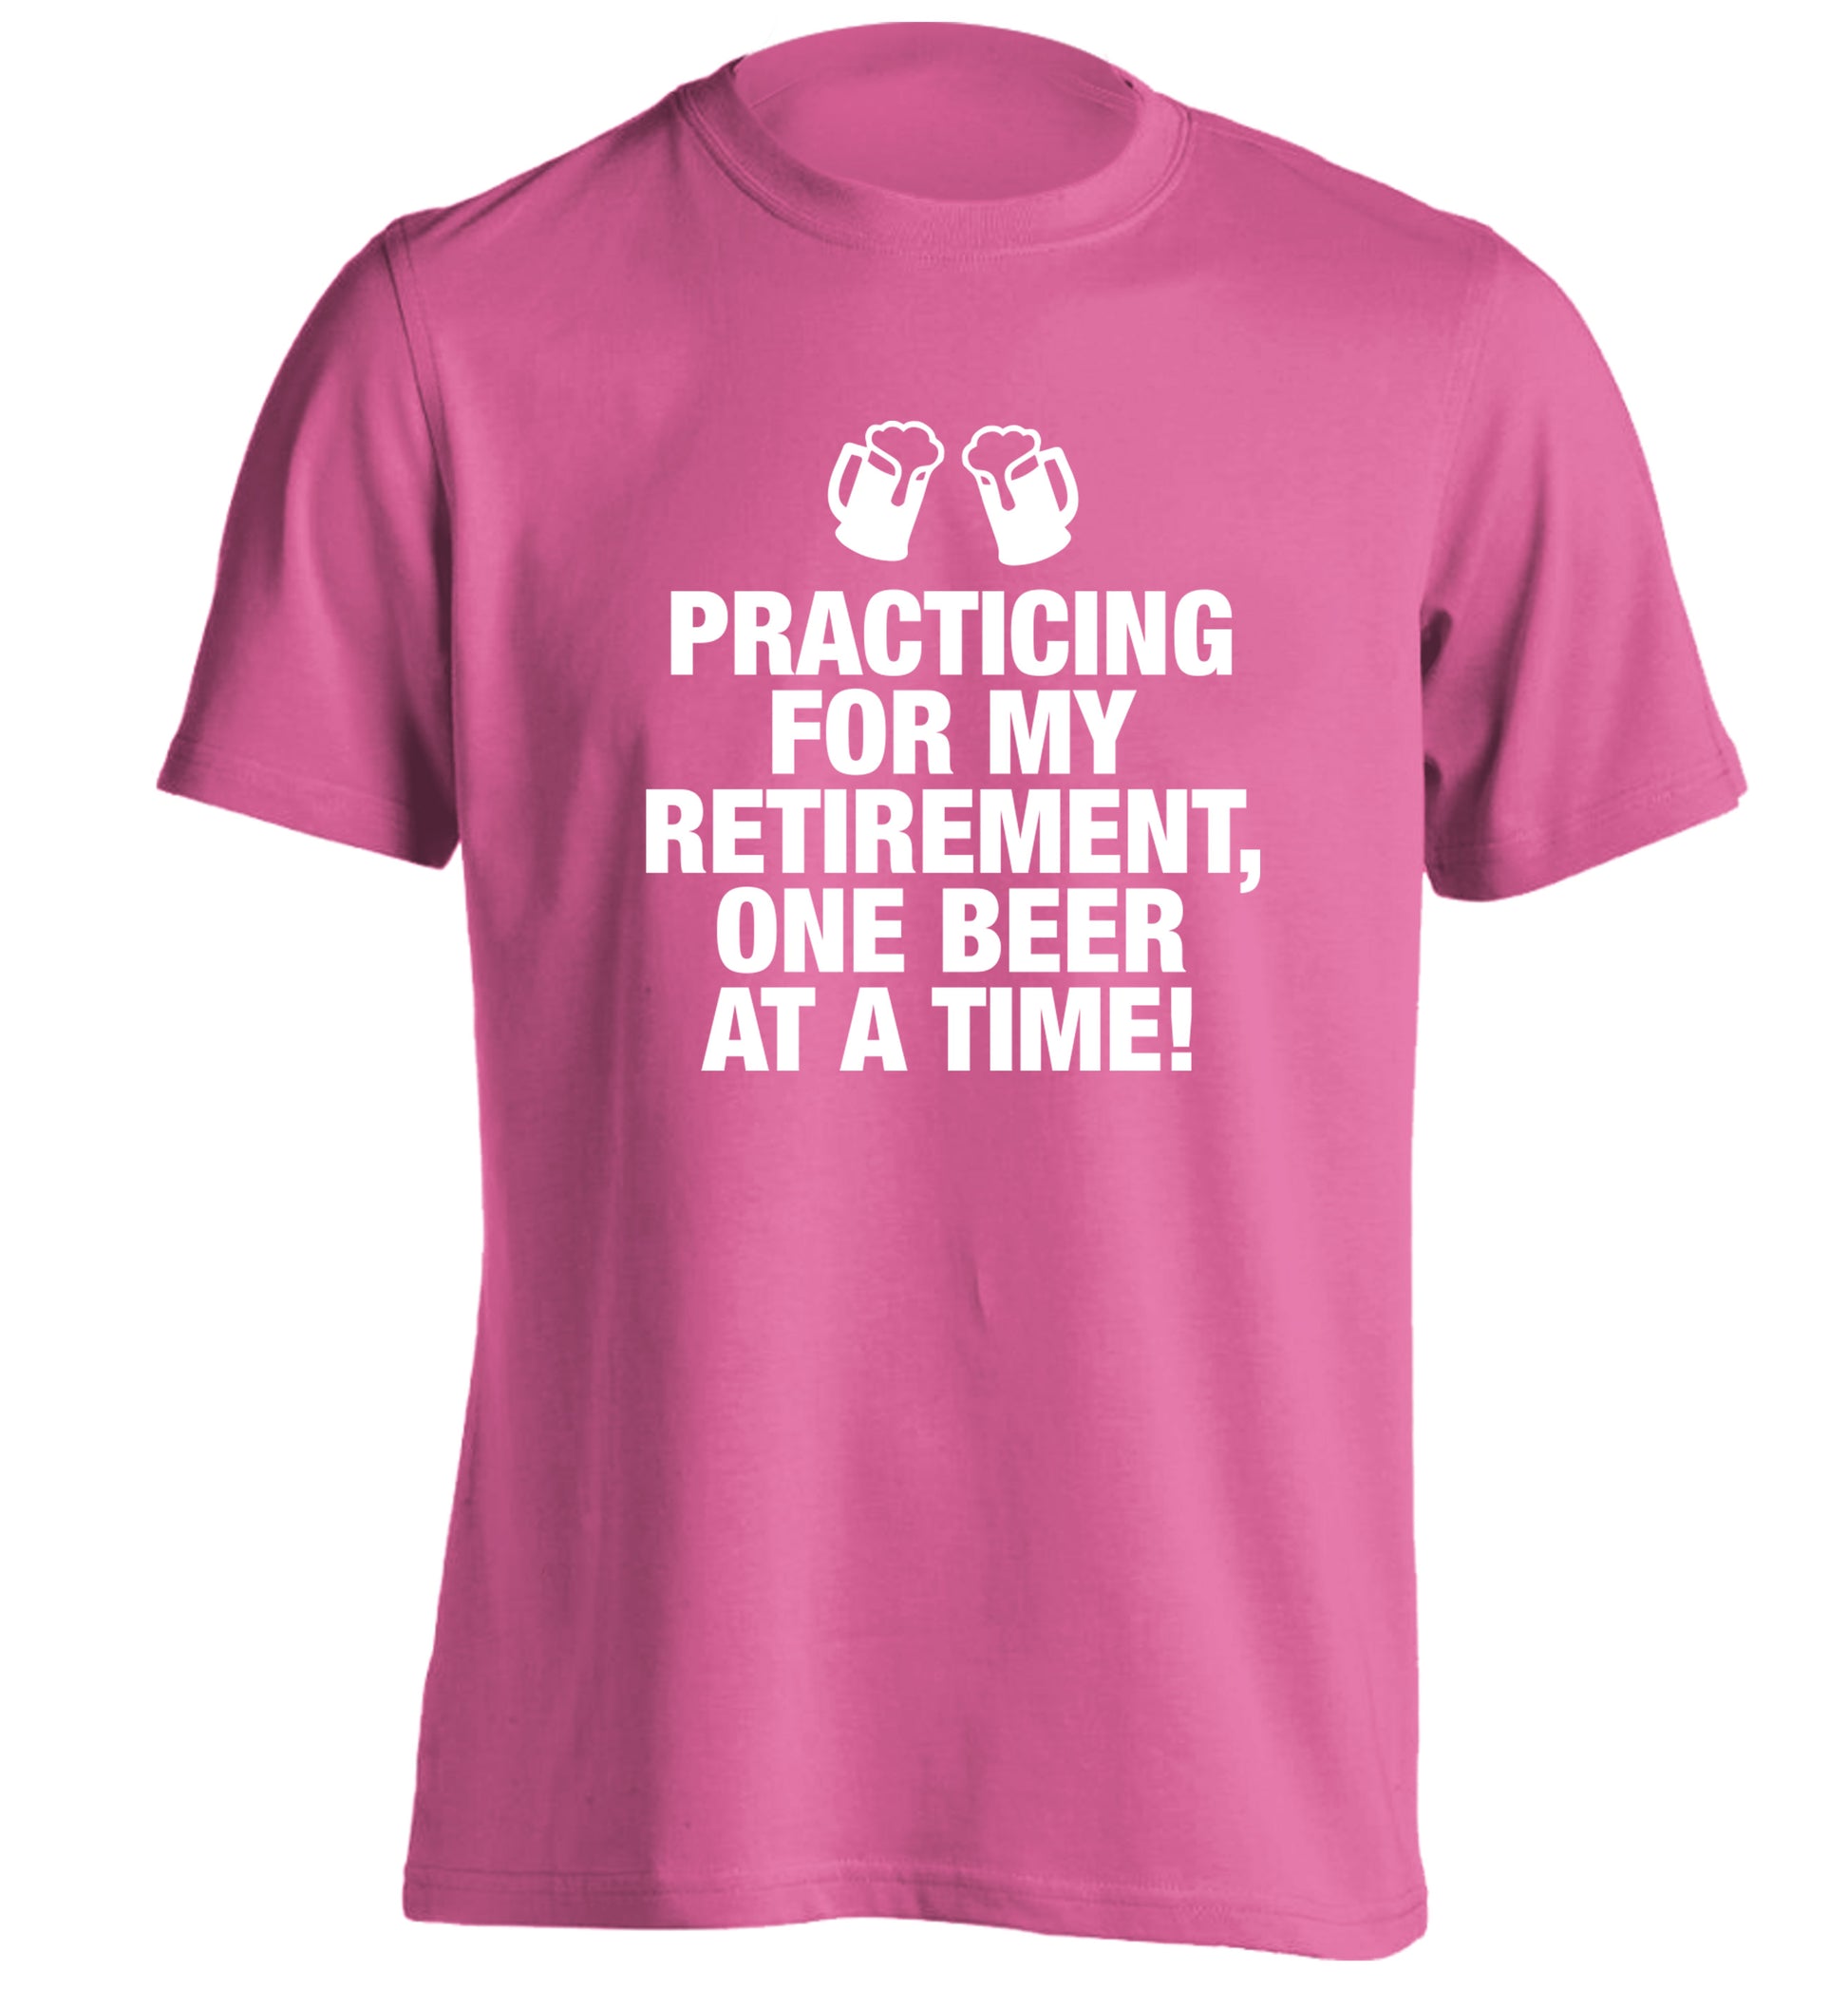 Practicing my retirement one beer at a time adults unisex pink Tshirt 2XL